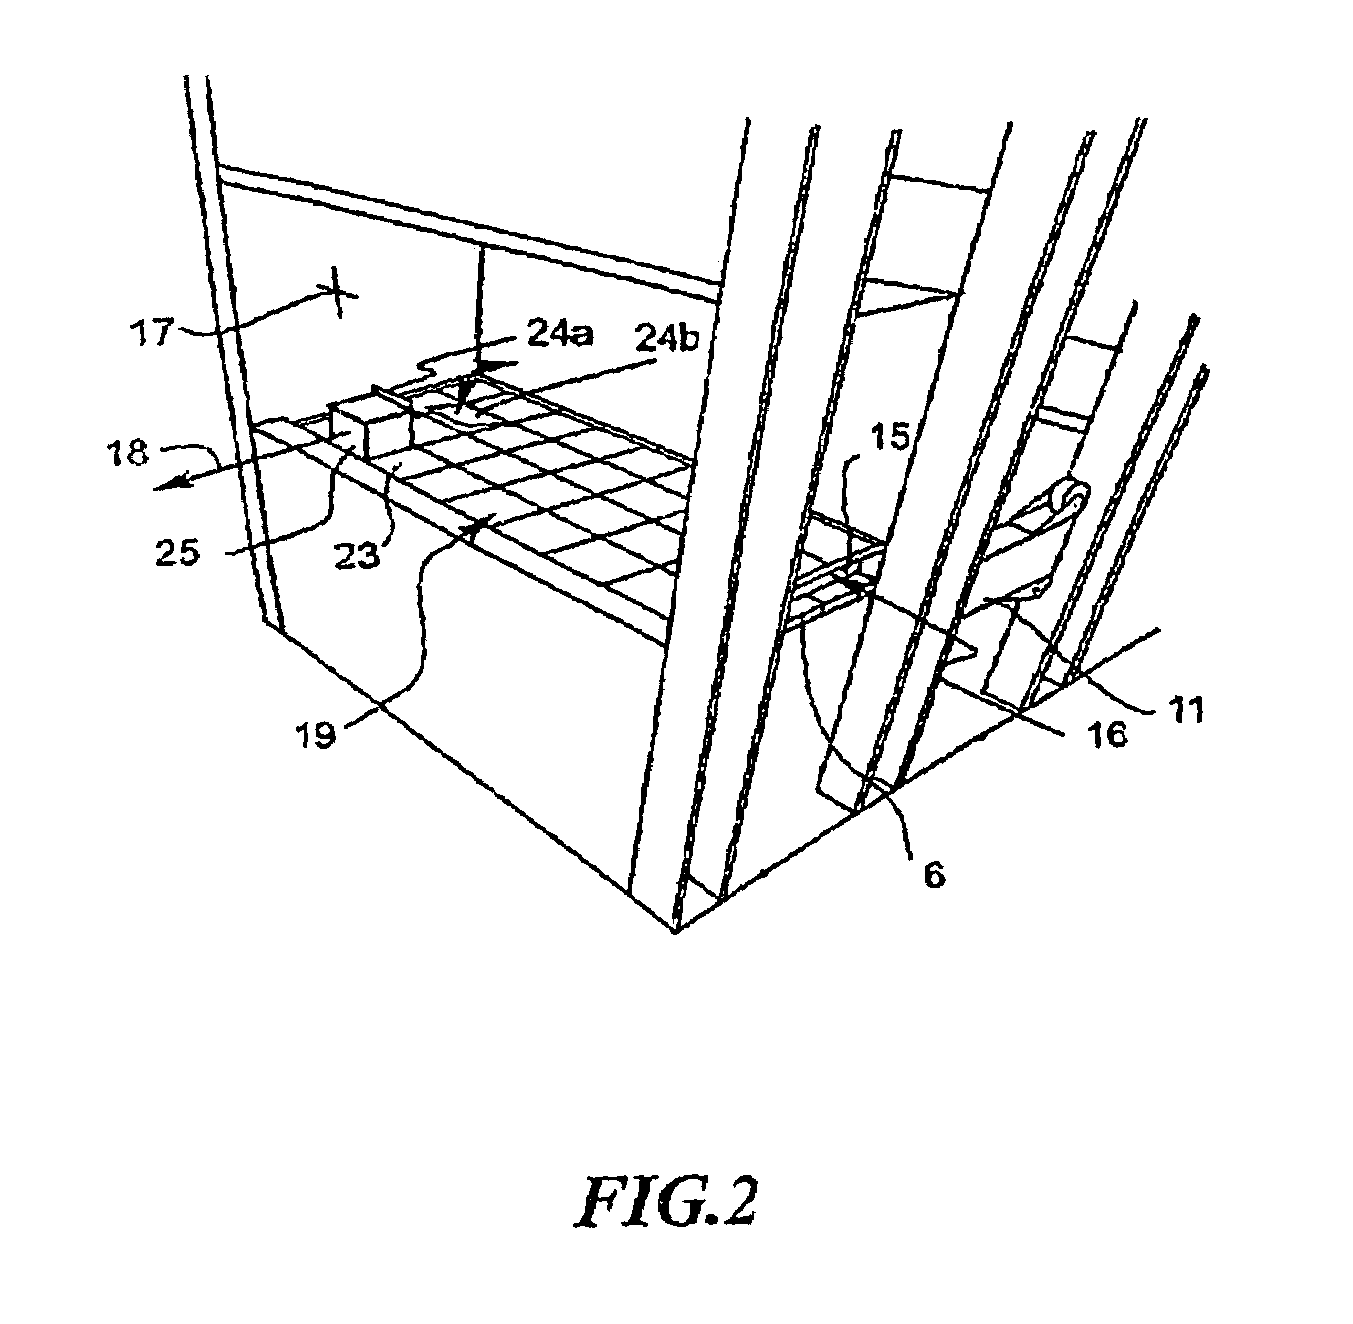 Storage system with access control system